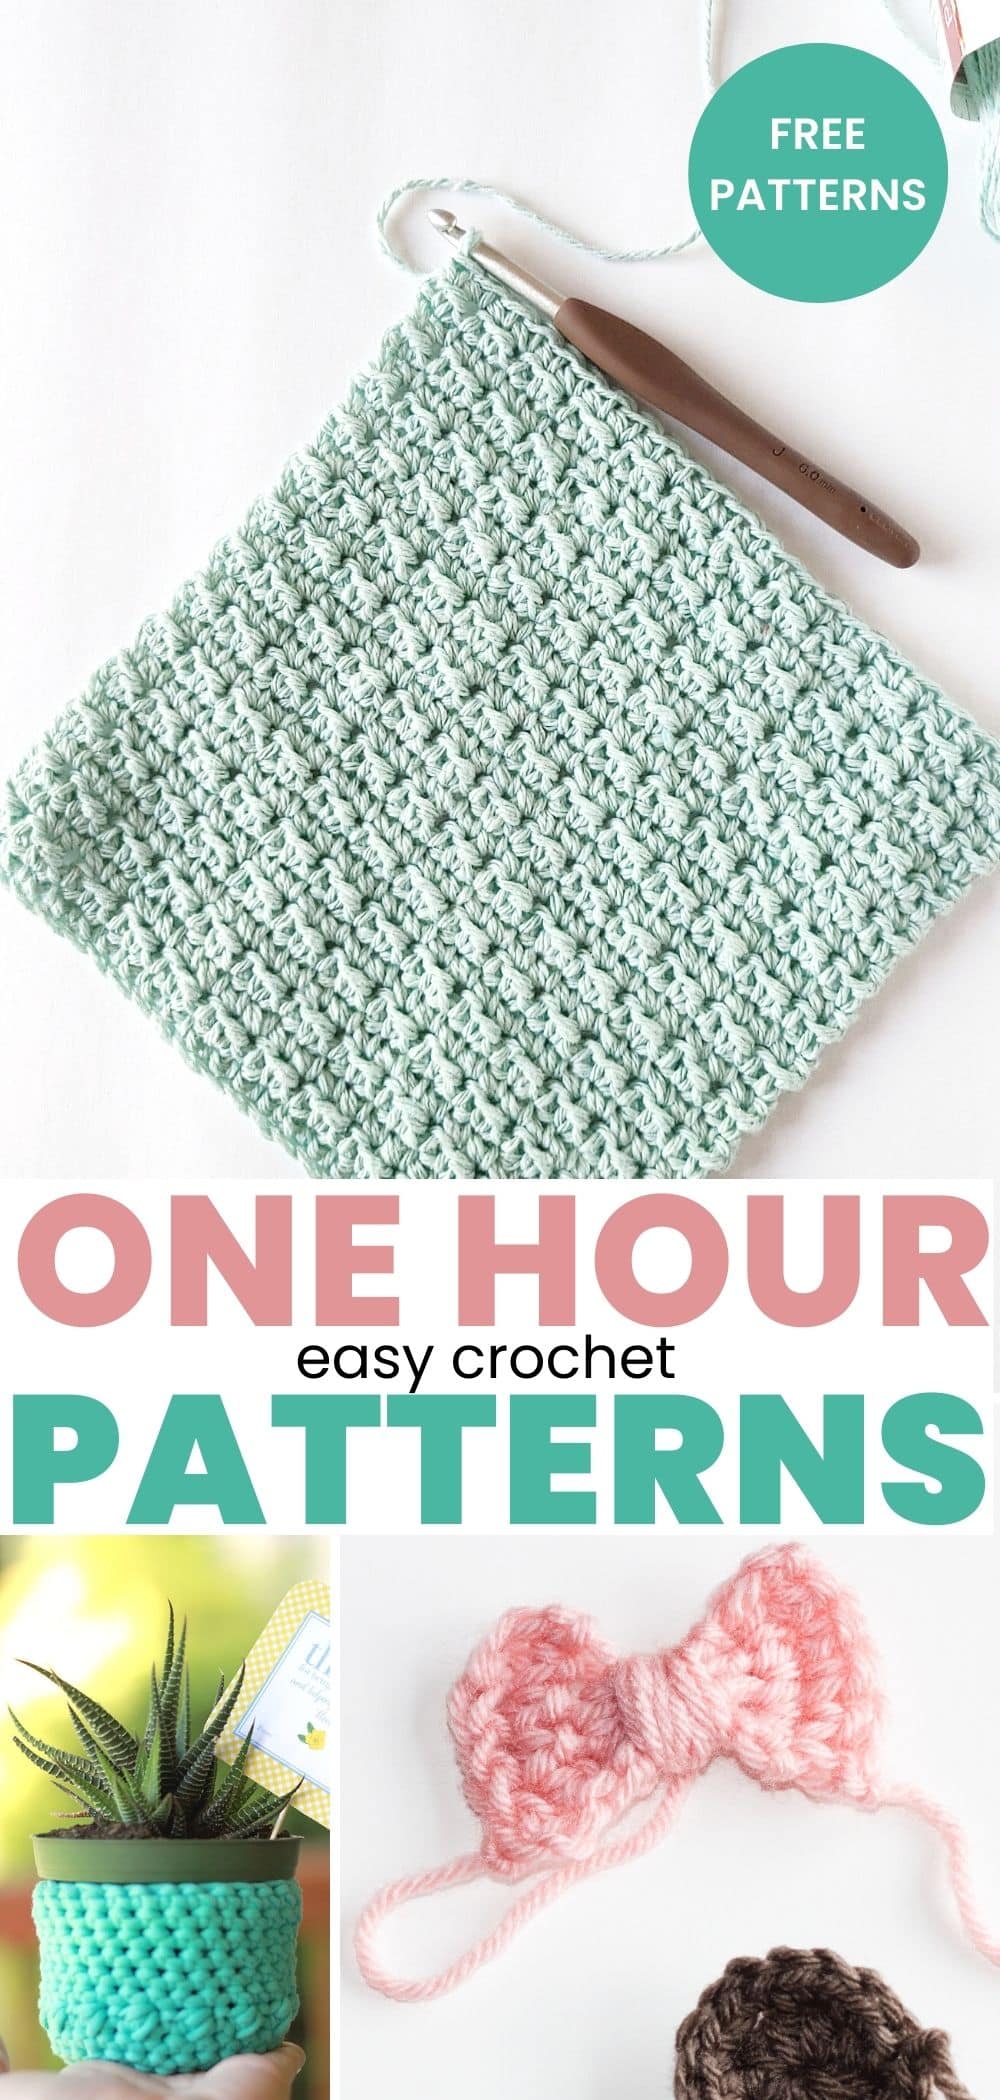 one hour crochet patterns